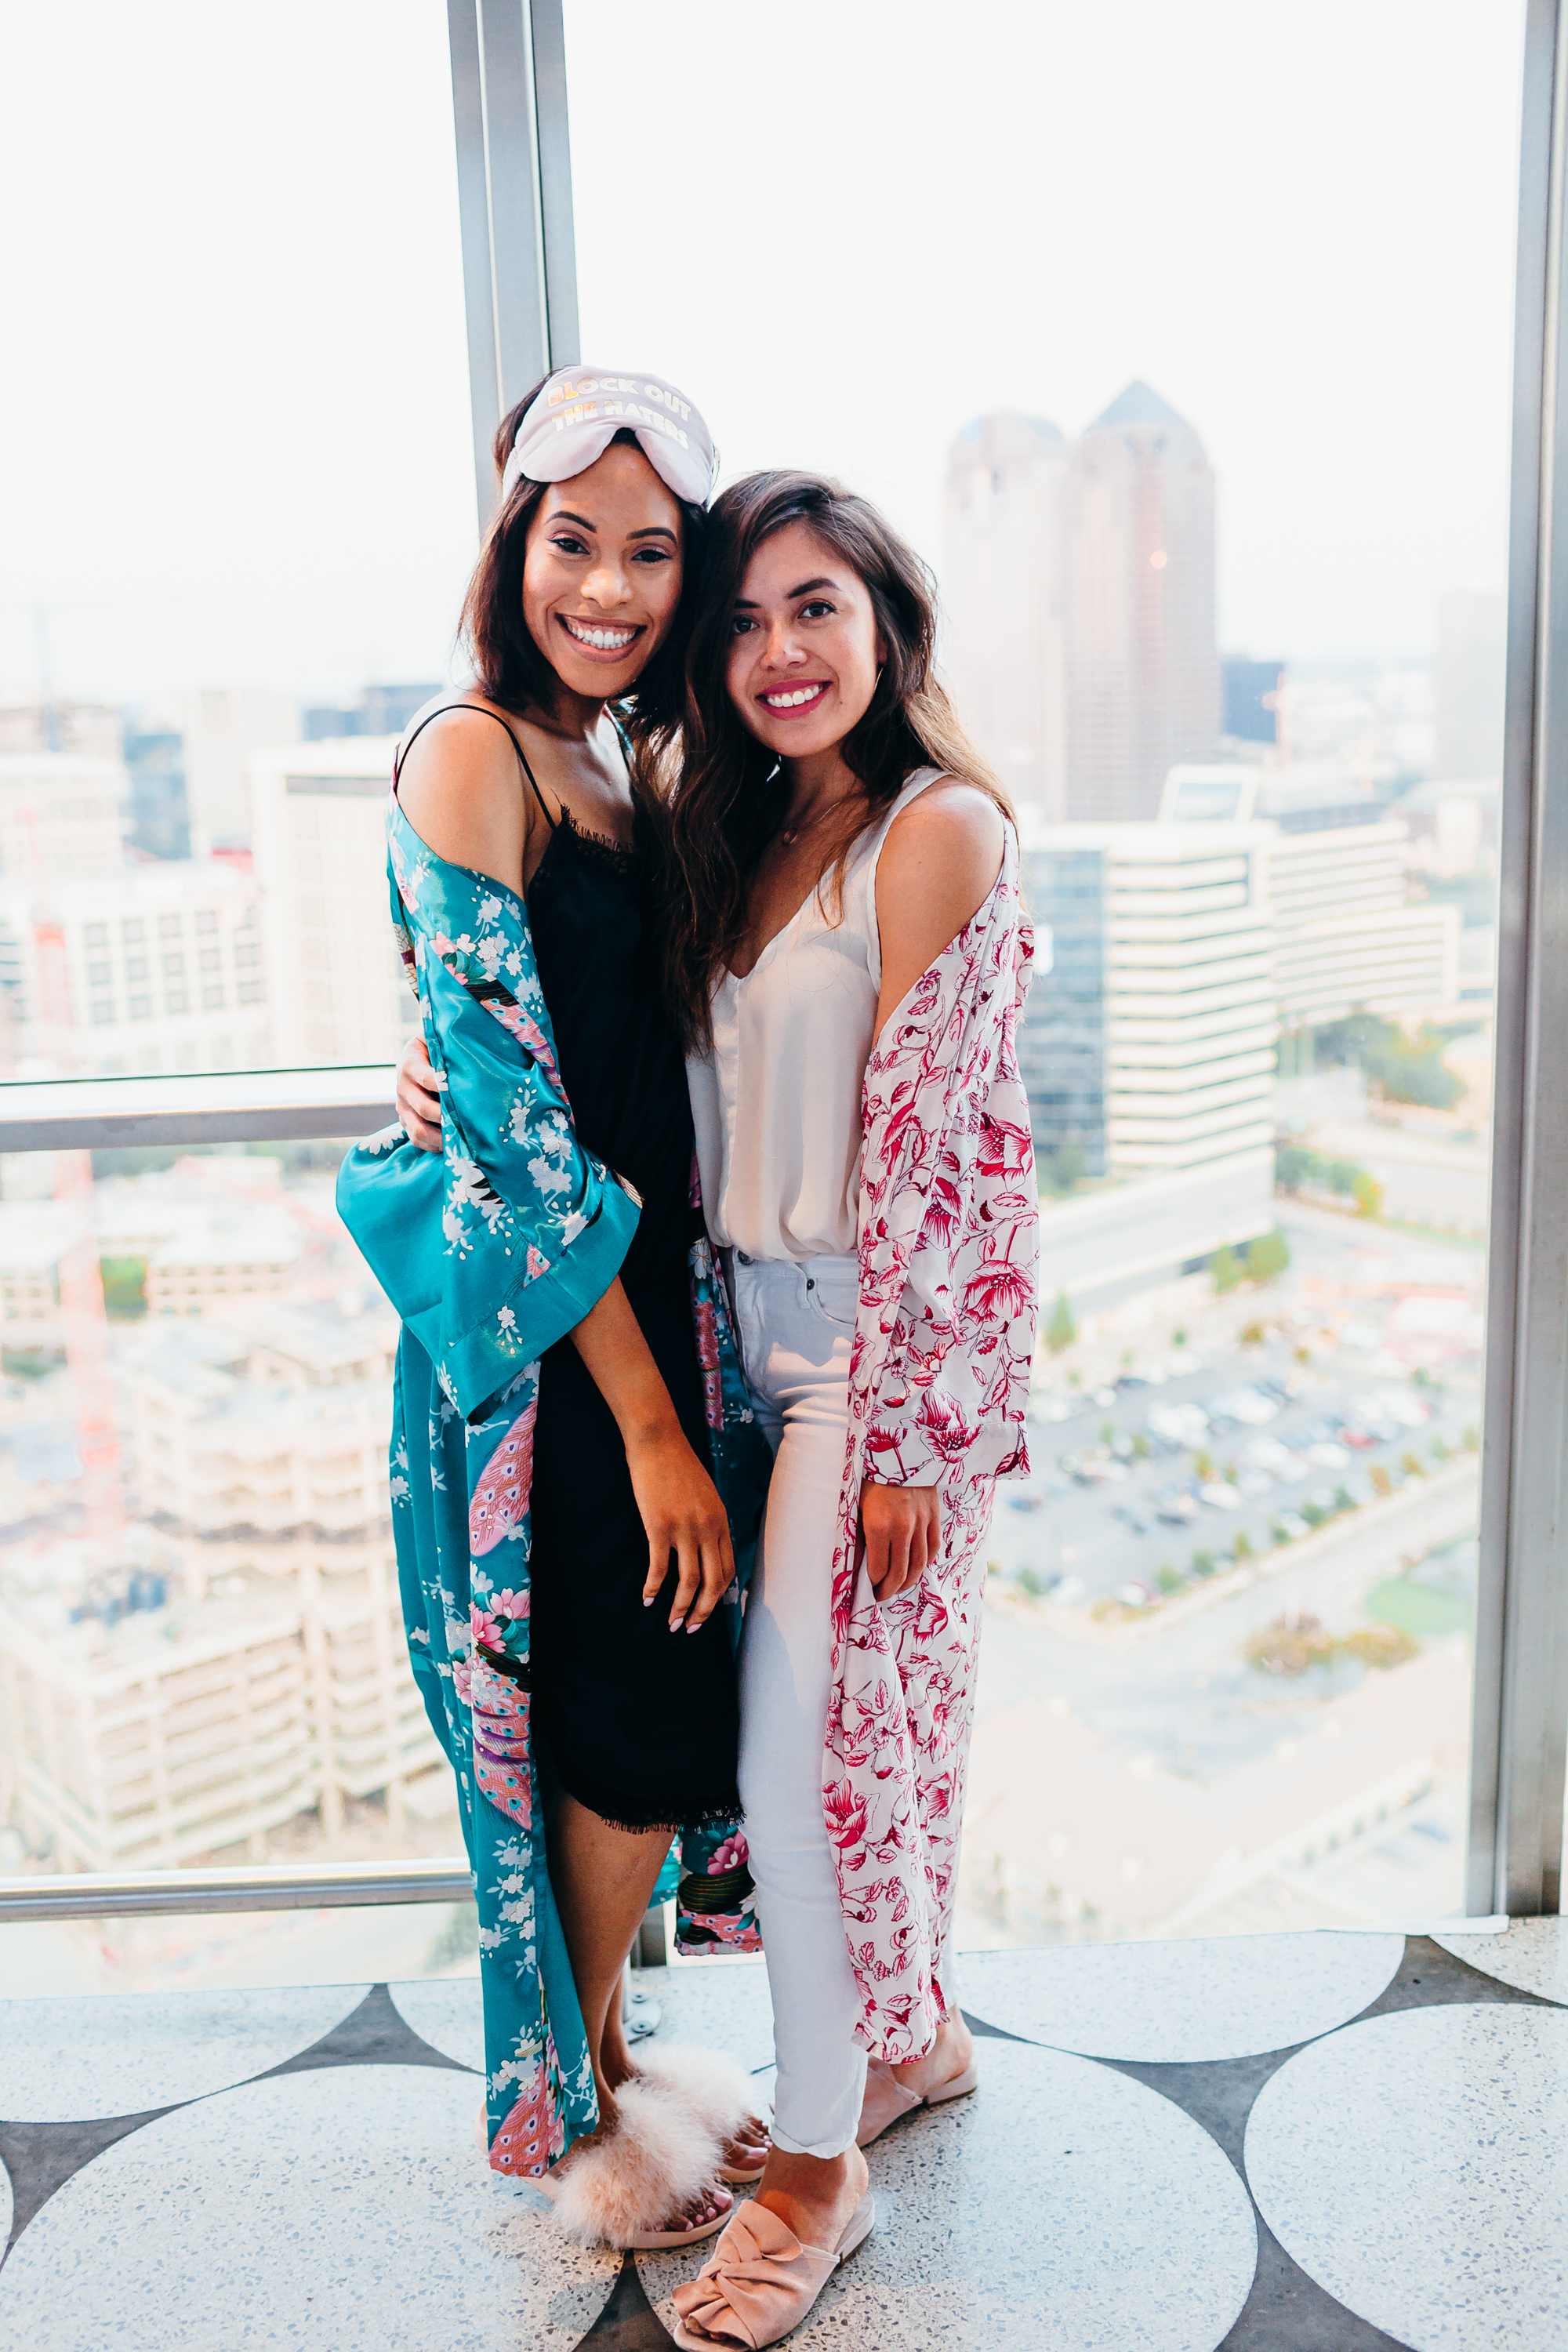 bumble-bff-dallas-launch-event-6485.jpg